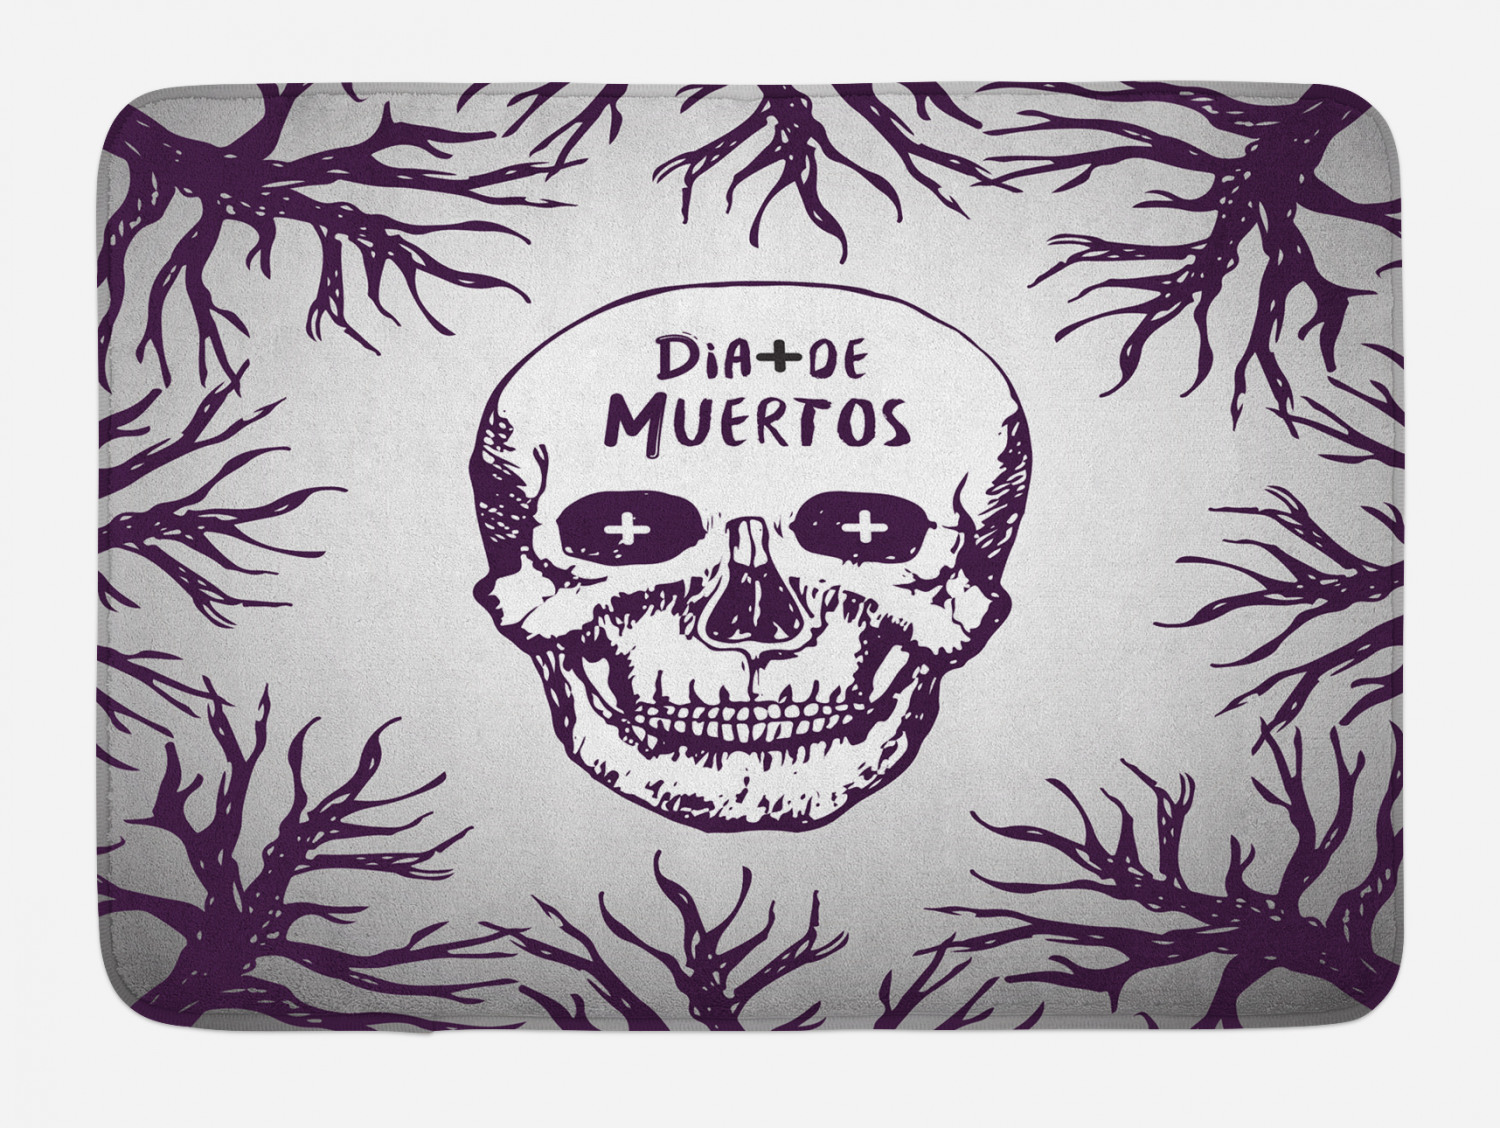 Mexican Bath Mat, Quote with Spooky Skull Head among Tree Branches Calaveral Carnival Holiday Graphic, Non-Slip Plush Mat Bathroom Kitchen Laundry Room Decor, 29.5 X 17.5 Inches, Purple, Ambesonne - image 1 of 2